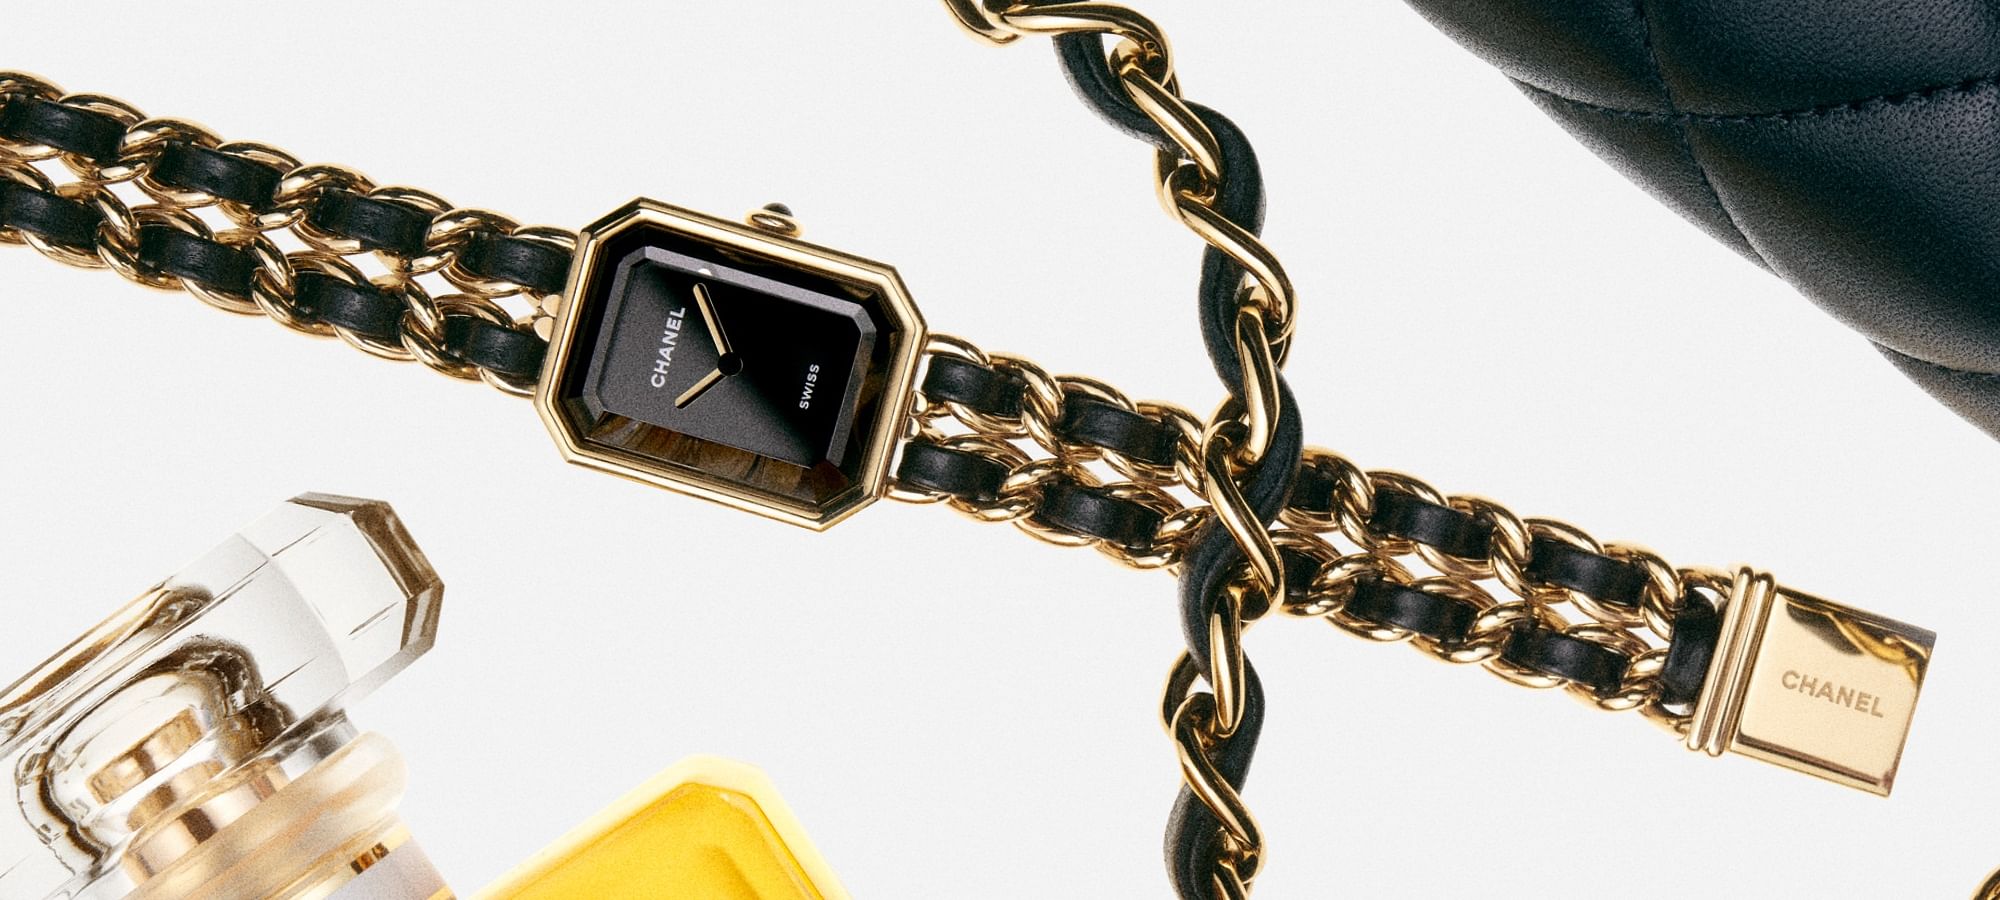 Chanel's 2022 update to its Première watch is off the chain